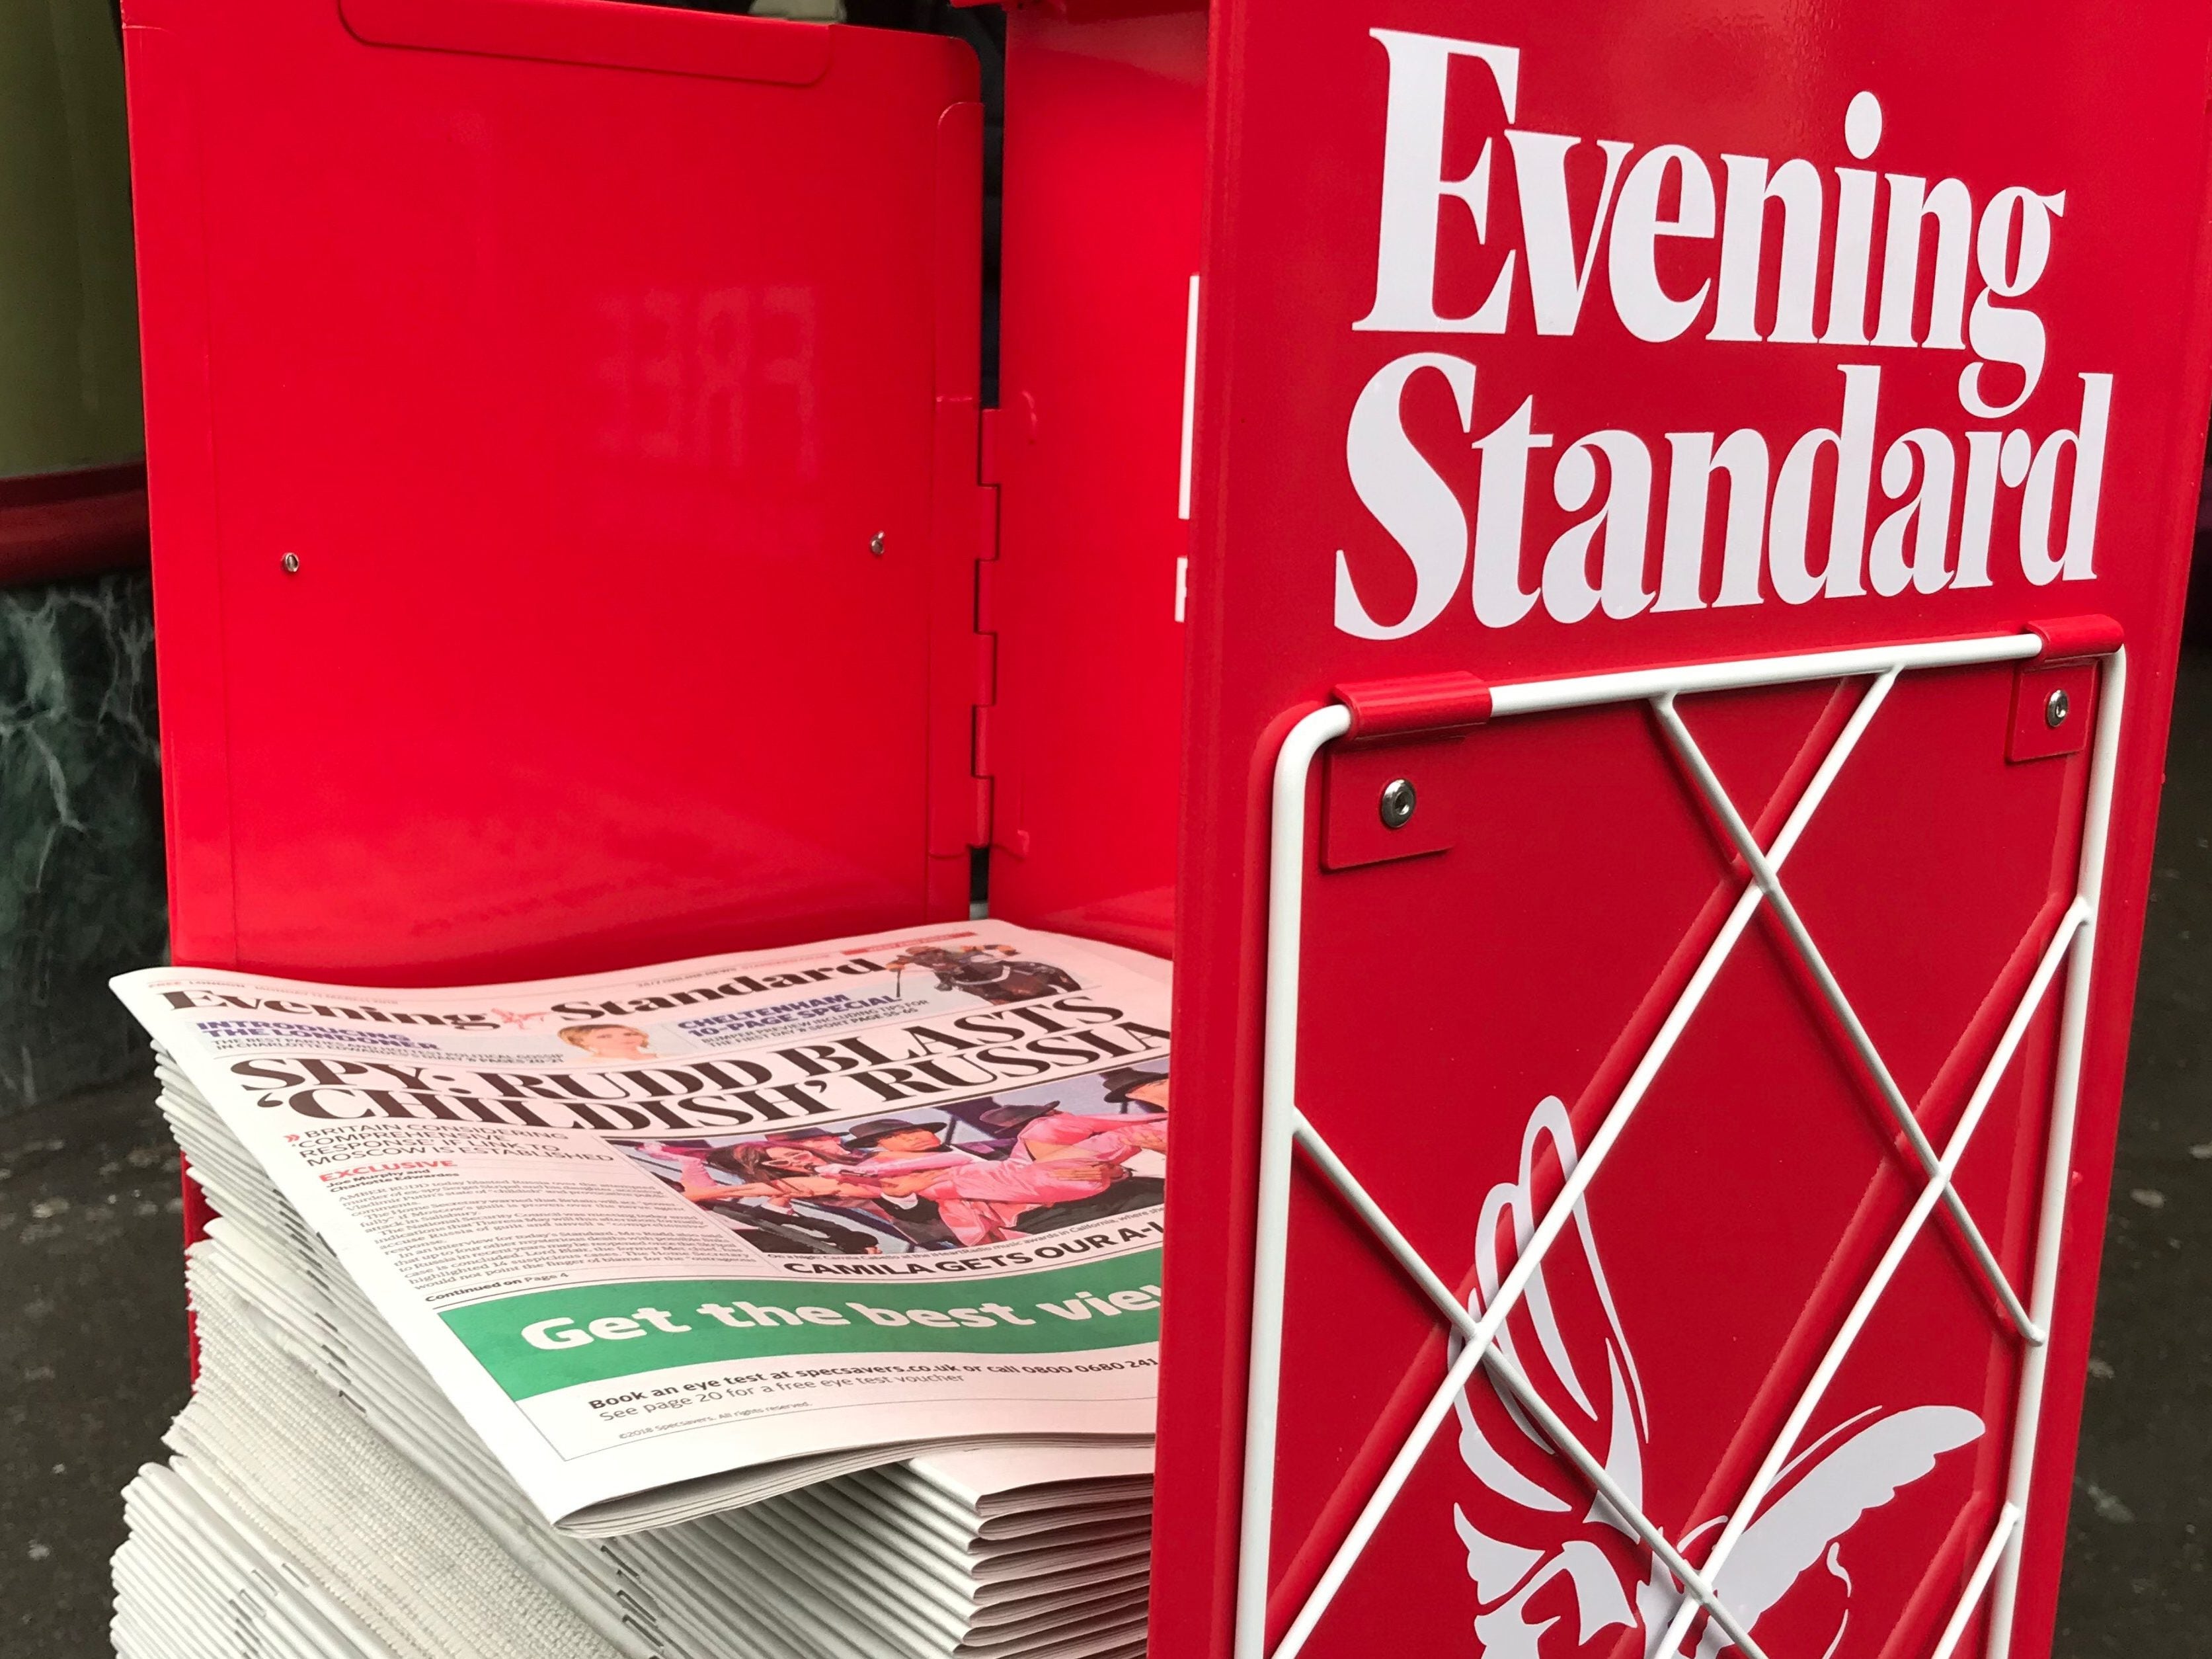 Saudi investments in Evening Standard and Independent trigger Government probe